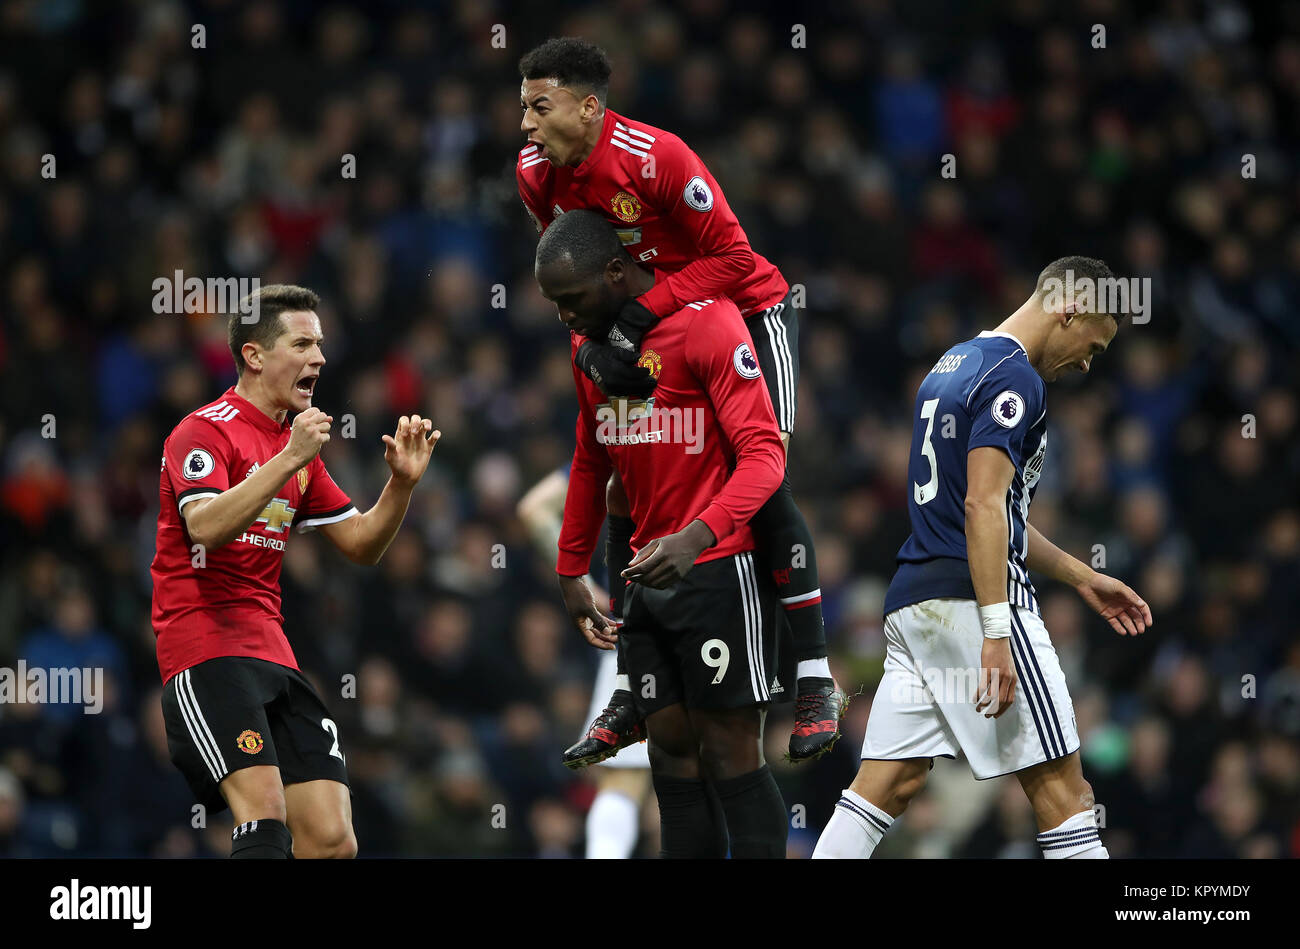 Manchester United's Romelu Lukaku (9) with a muted celebration after scoring his side's first goal of the game during the Premier League match at The Hawthorns, West Bromwich. Stock Photo